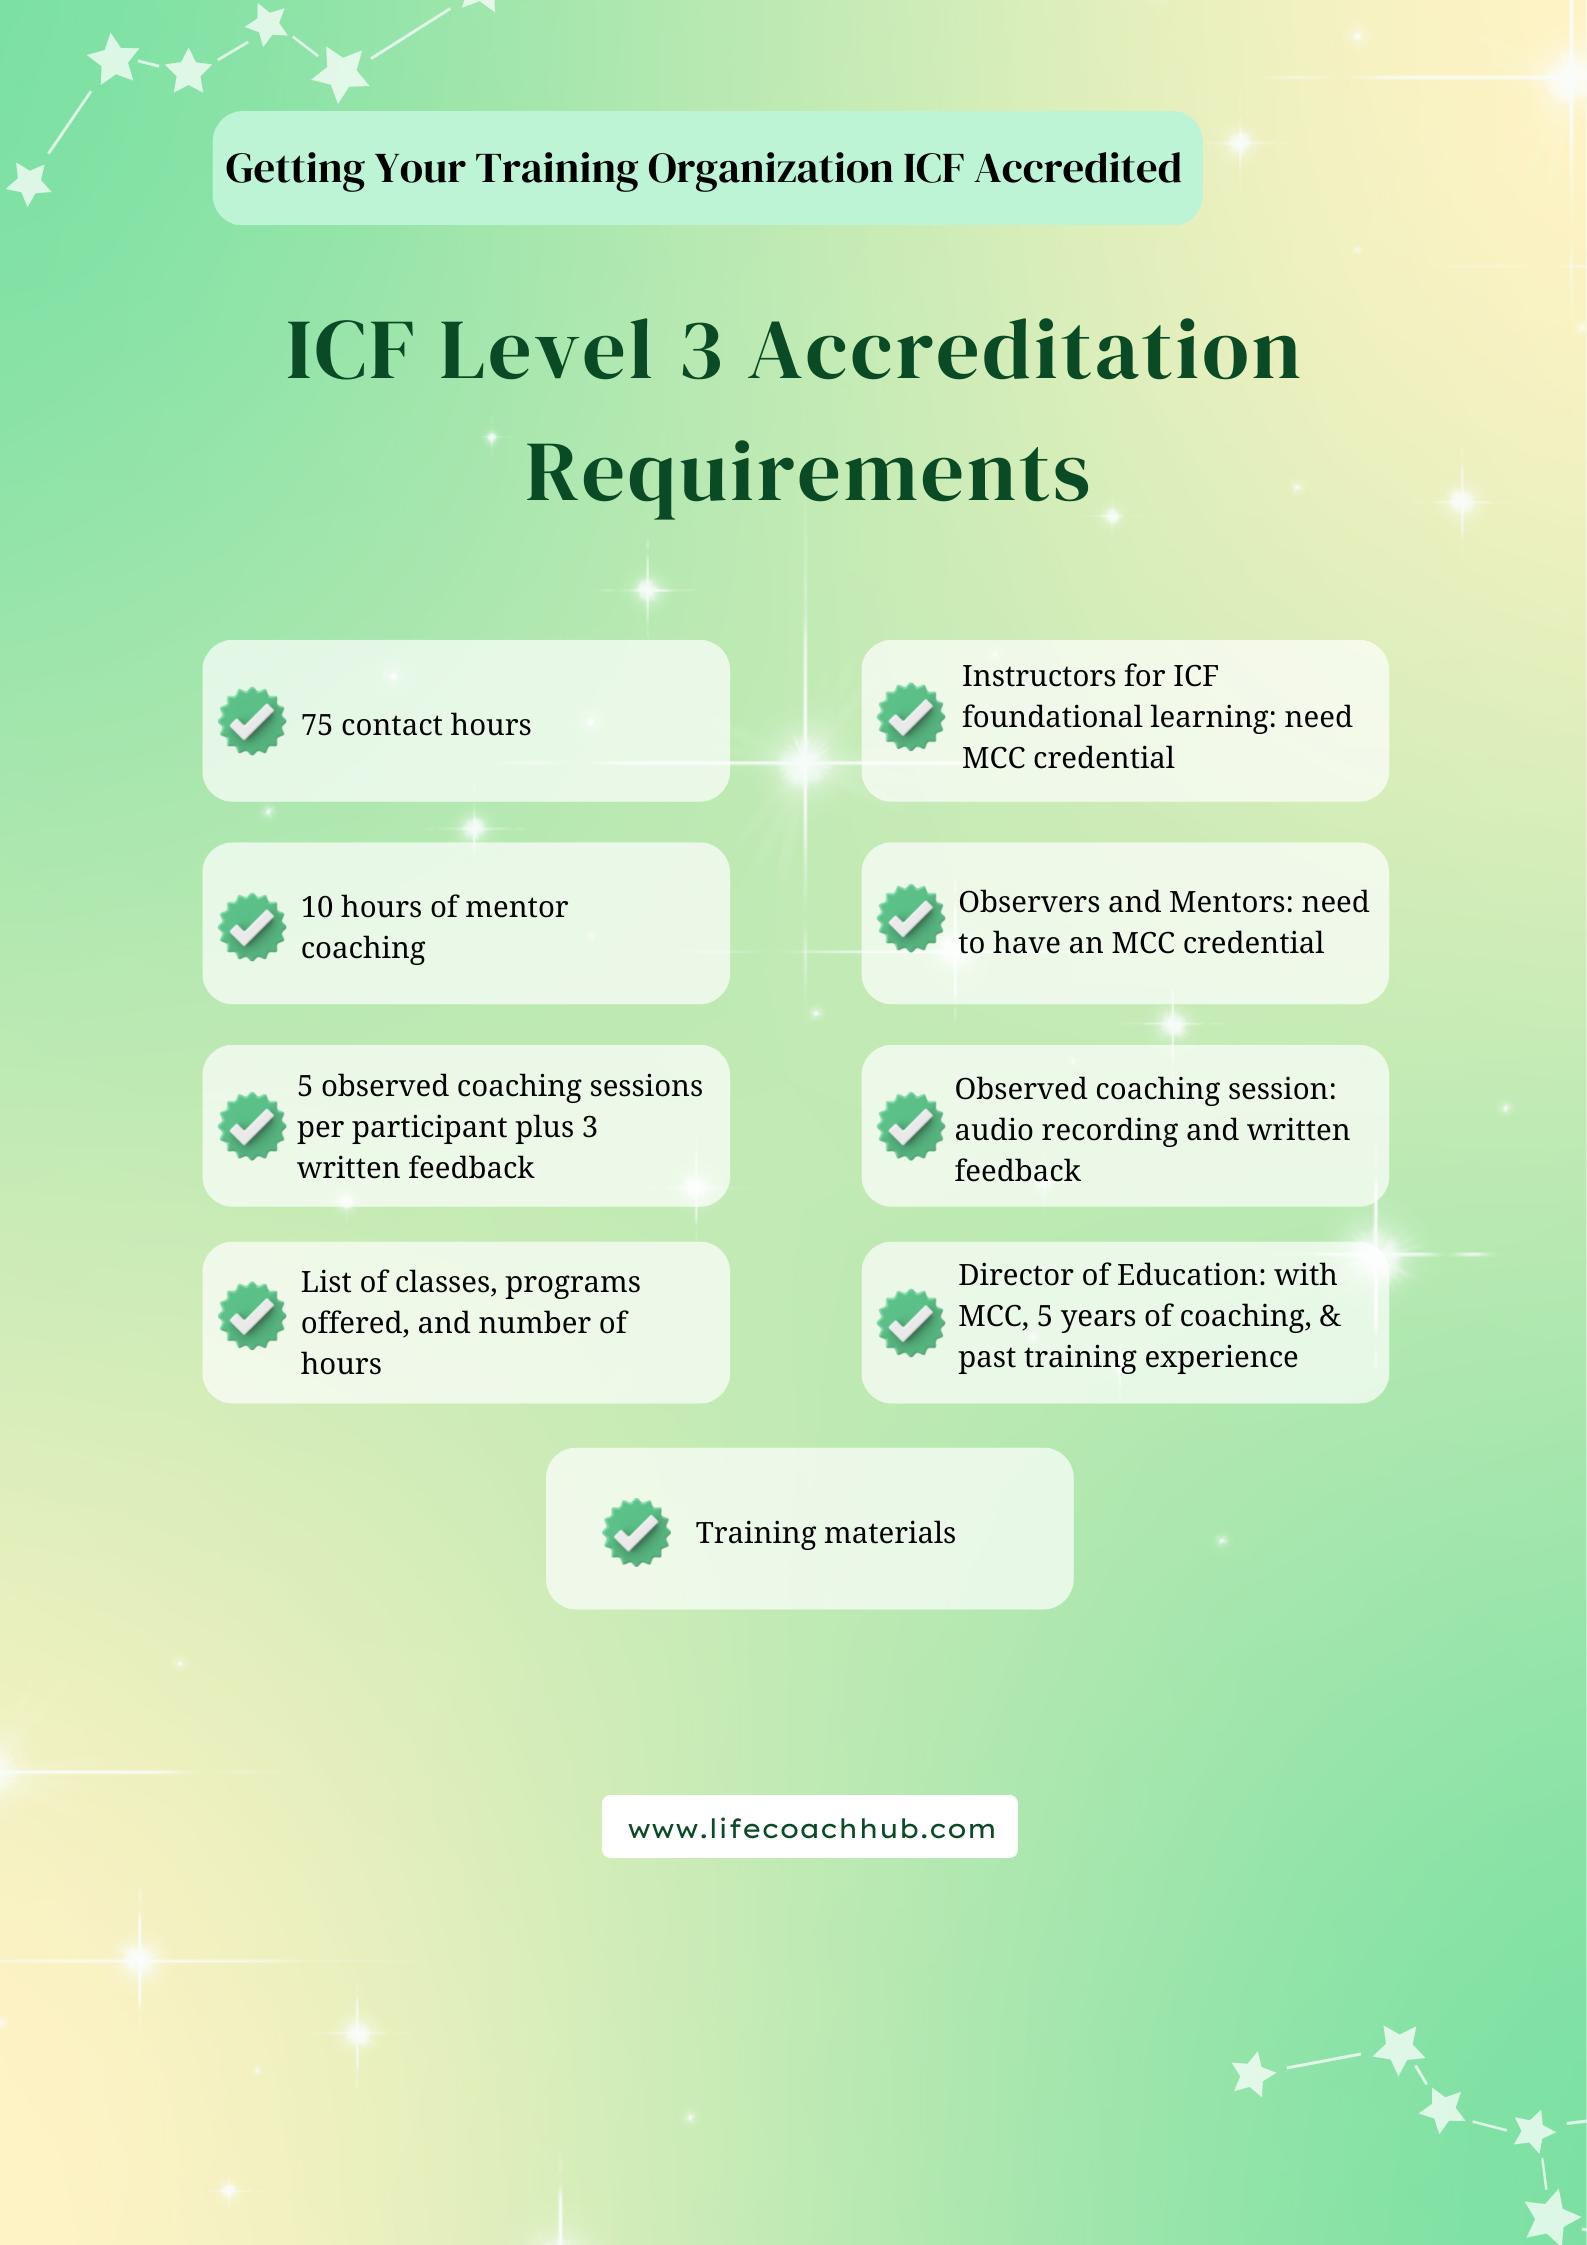 ICF Level 3 Accreditation requirements